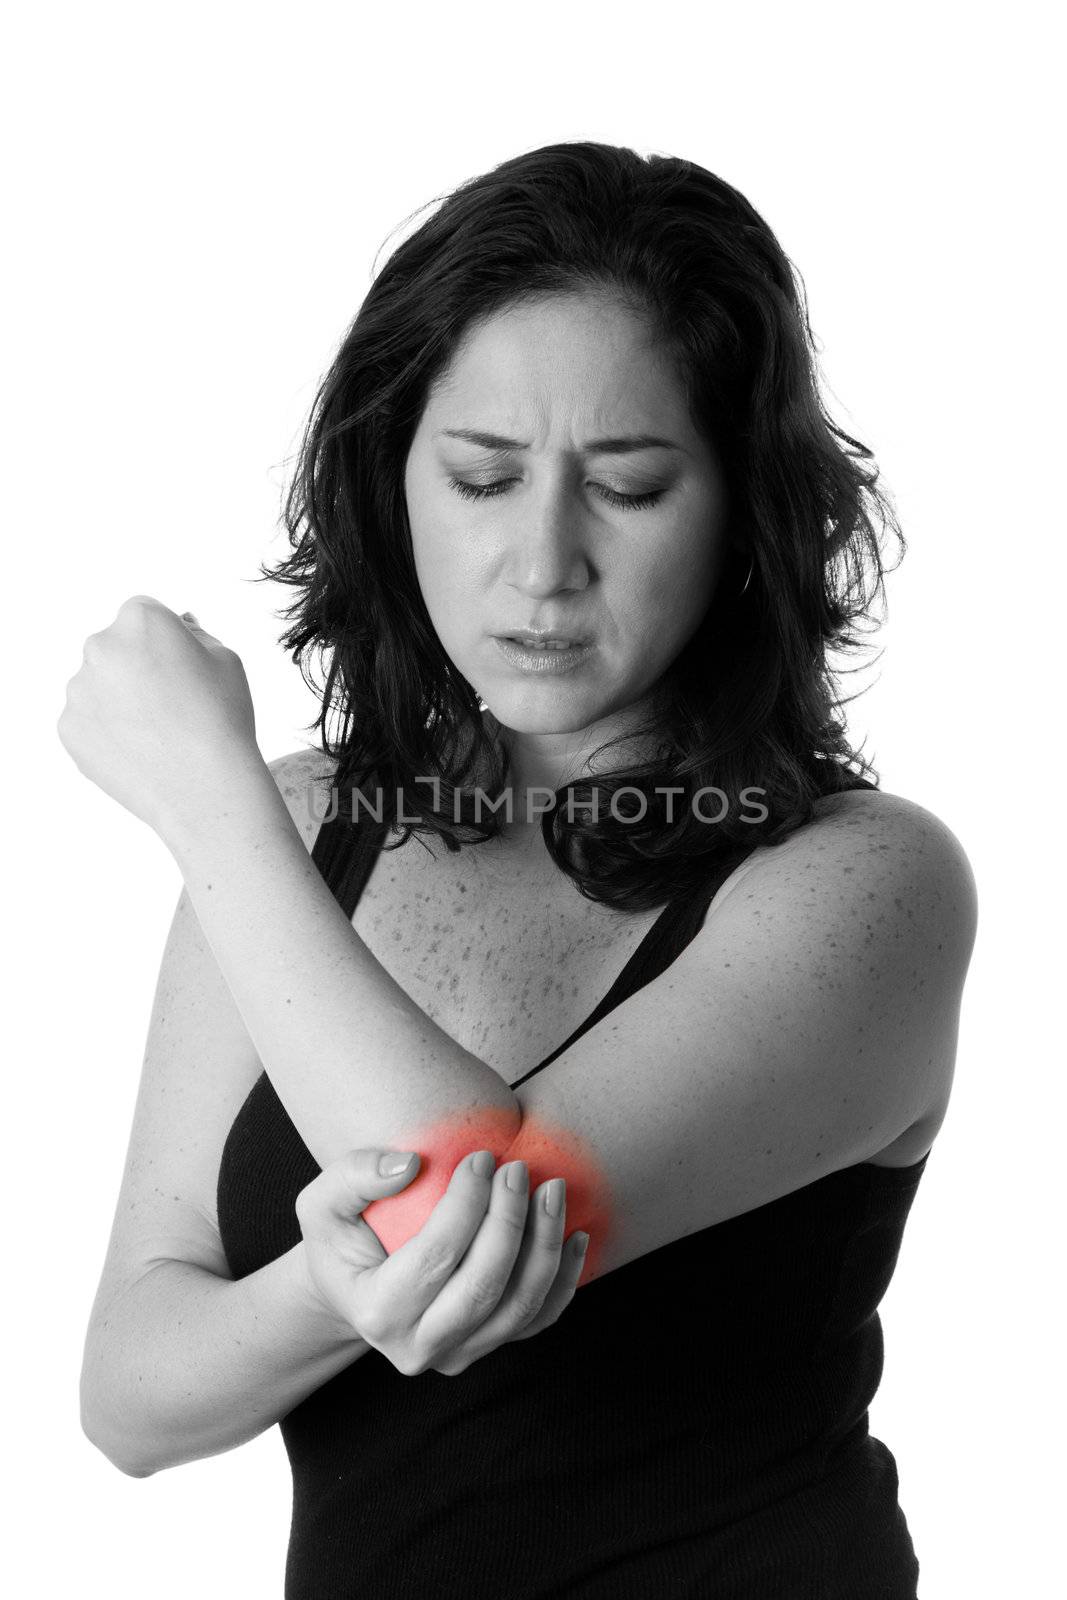 Beautiful woman holding her elbow with pain and arm ache,wearing a sporty black tank top, isolated.